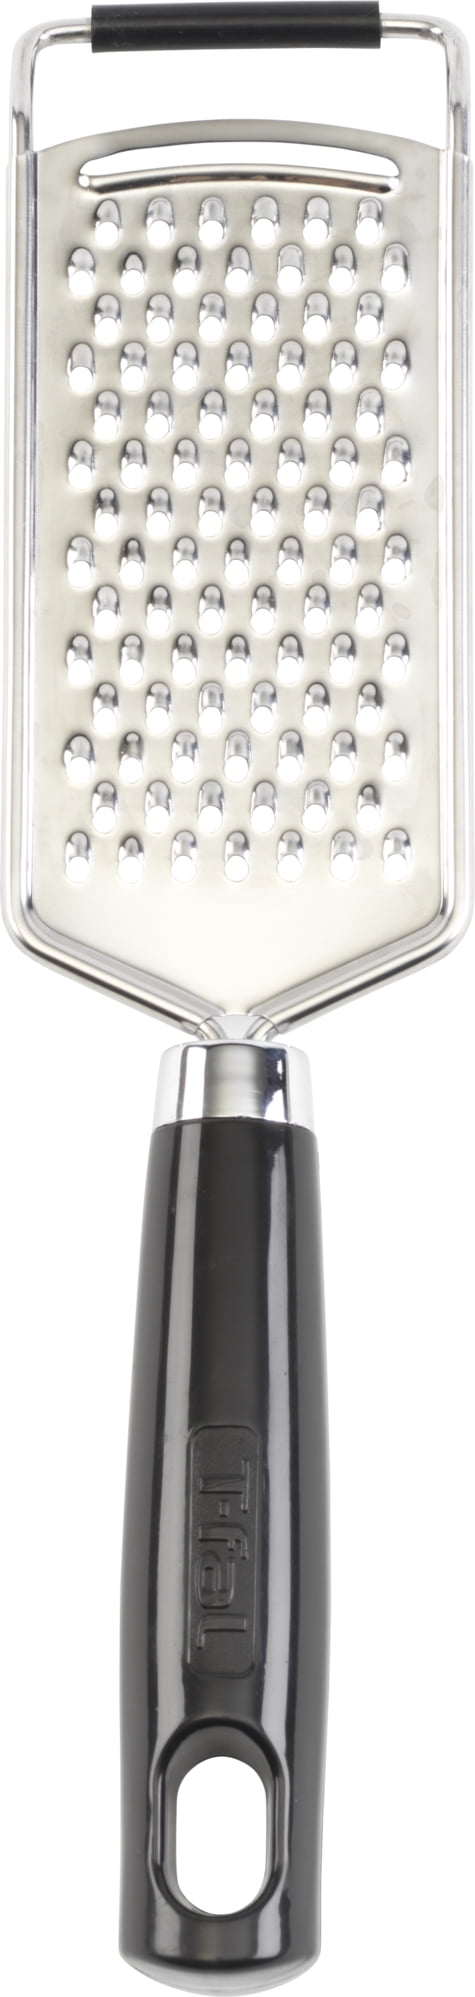 Tovolo 4-Sided Stainless Steel Box Grater - 6127299